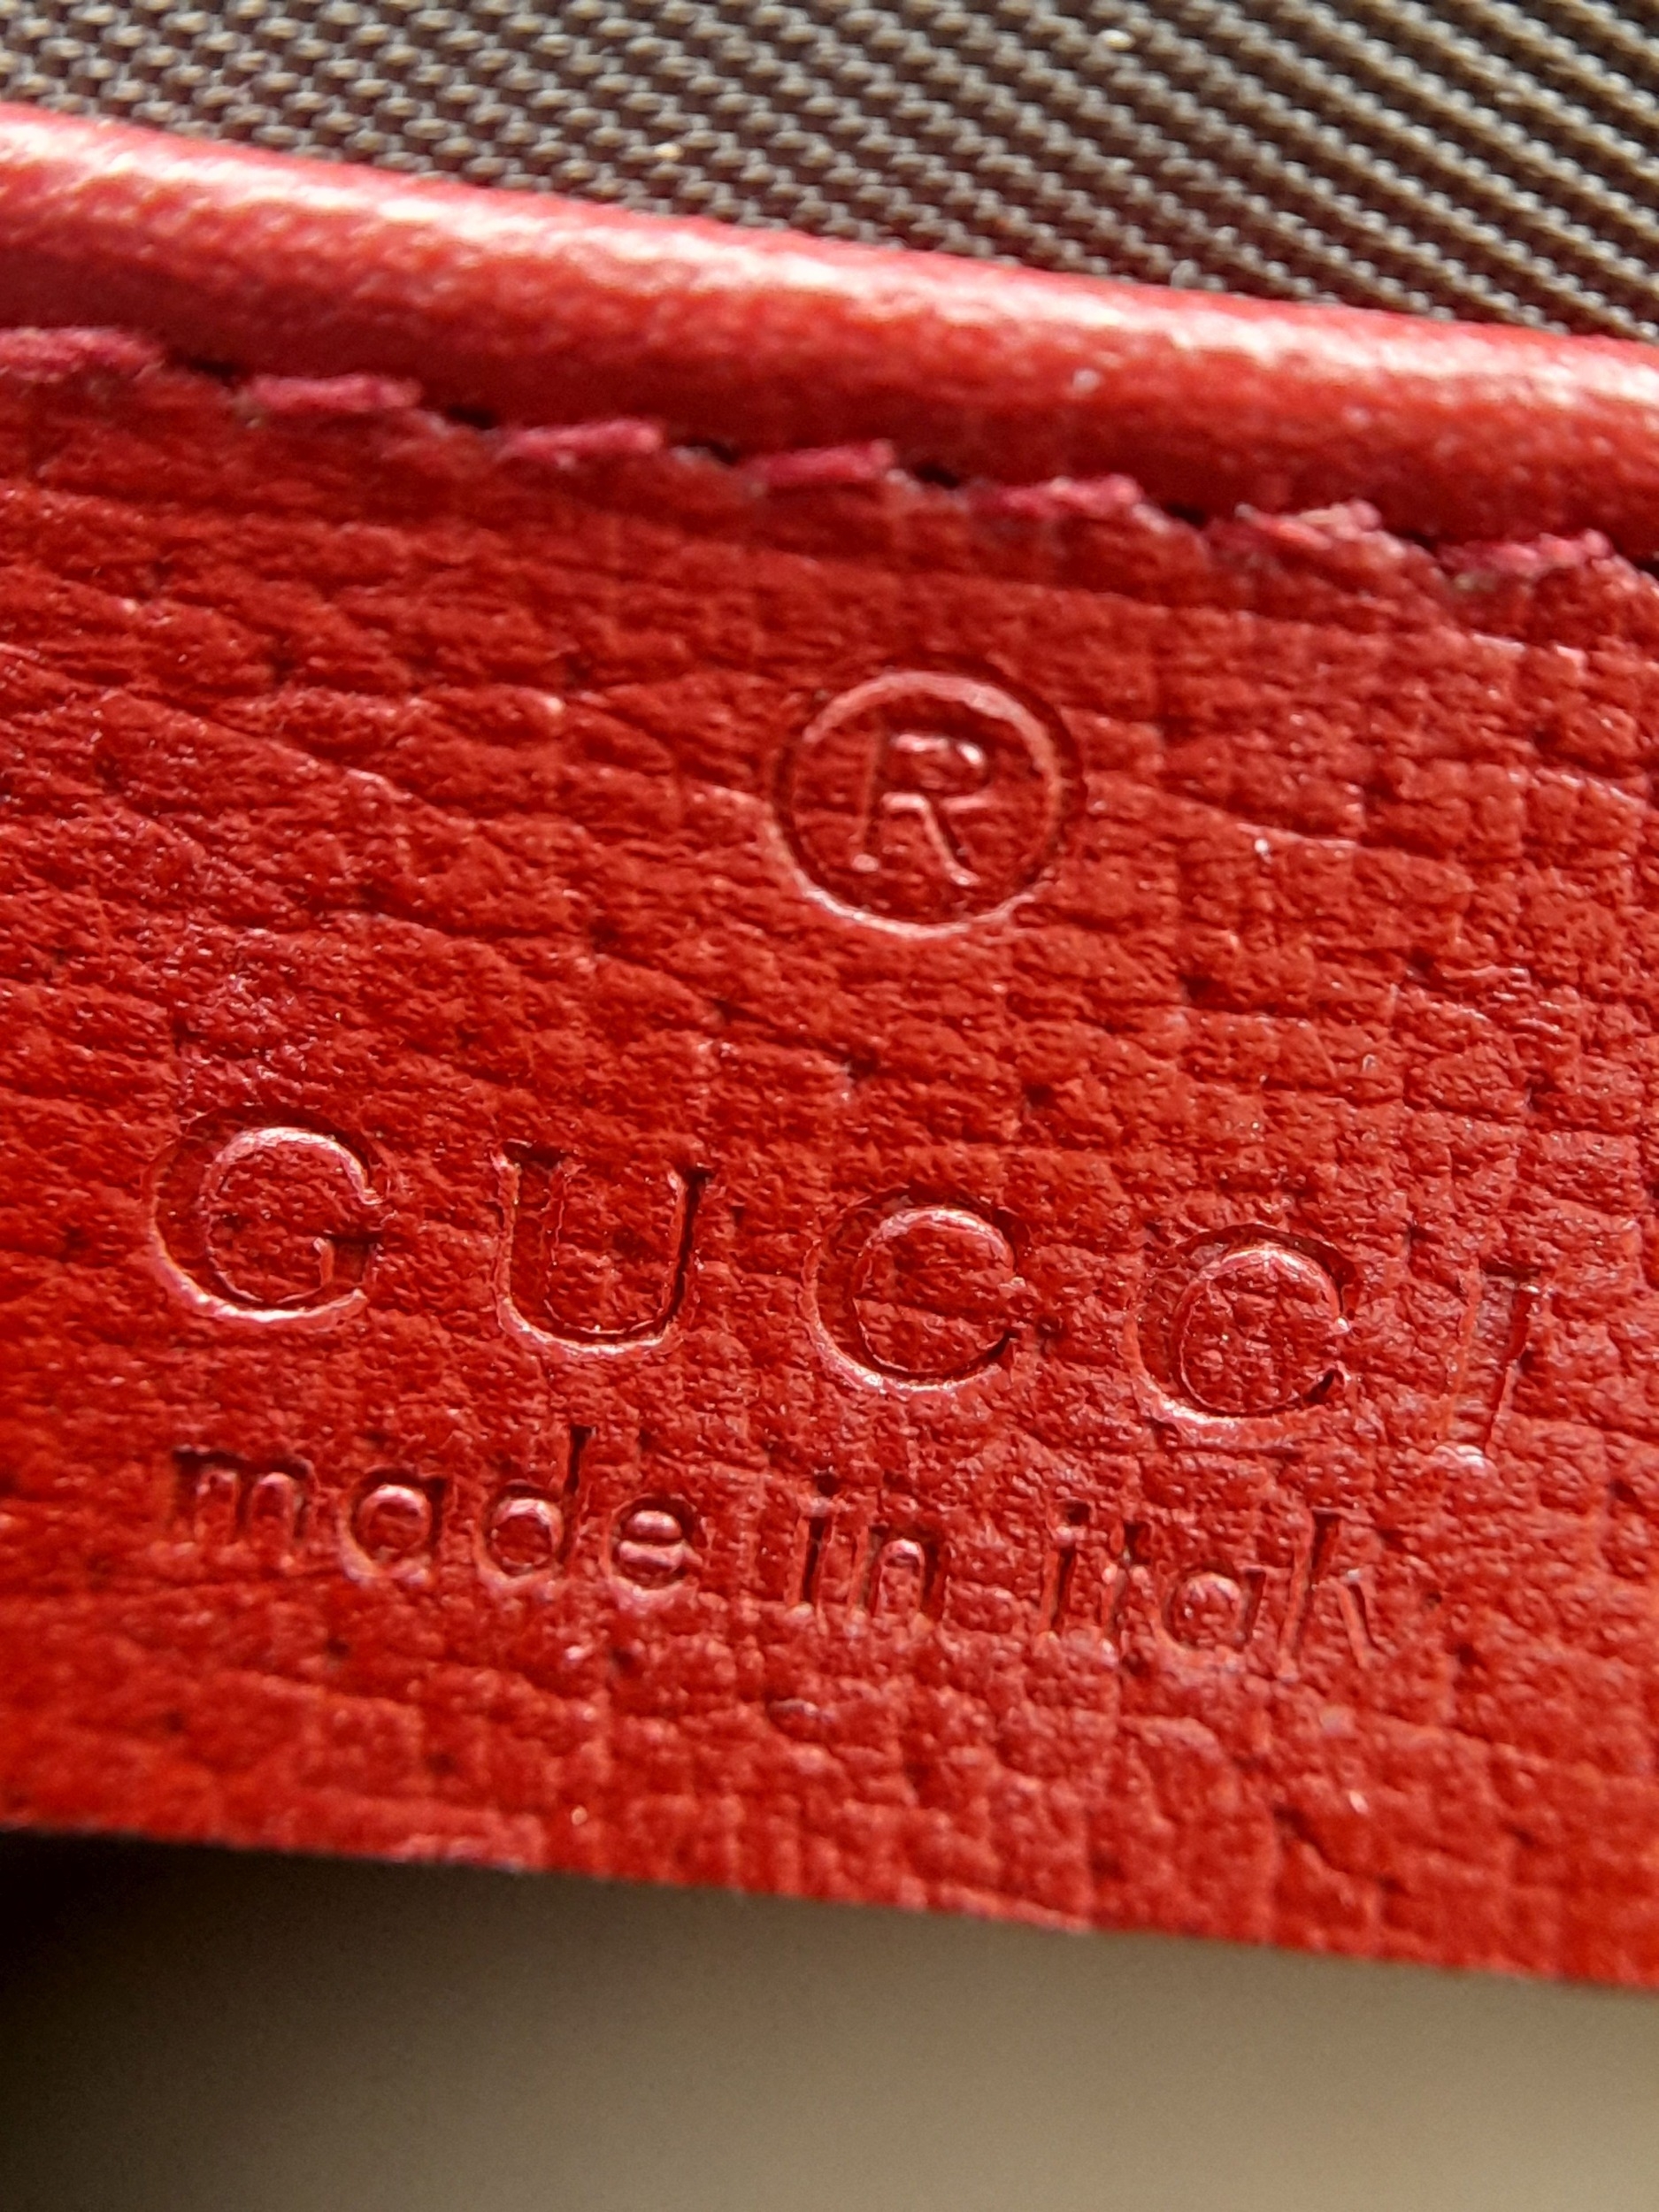 A Gucci Monogram 'Tian' Clutch Bag. Leather exterior with a depiction of a bird in nature, red - Image 7 of 7